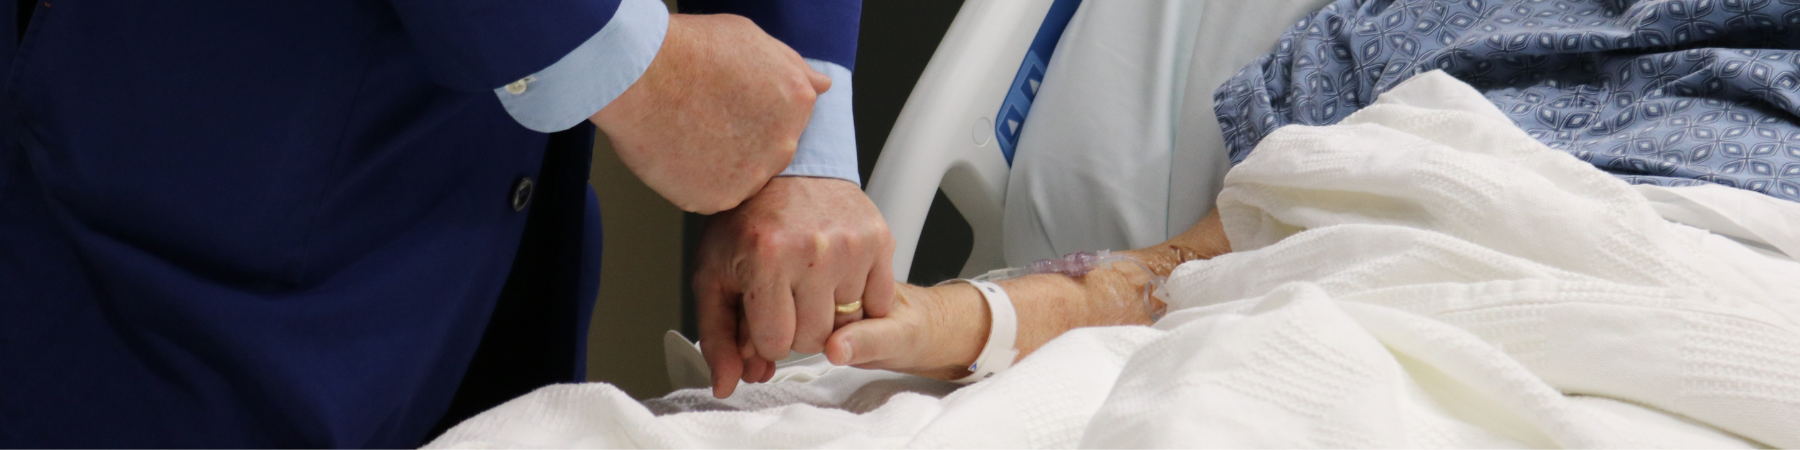 Chaplain holding the hand of a patient